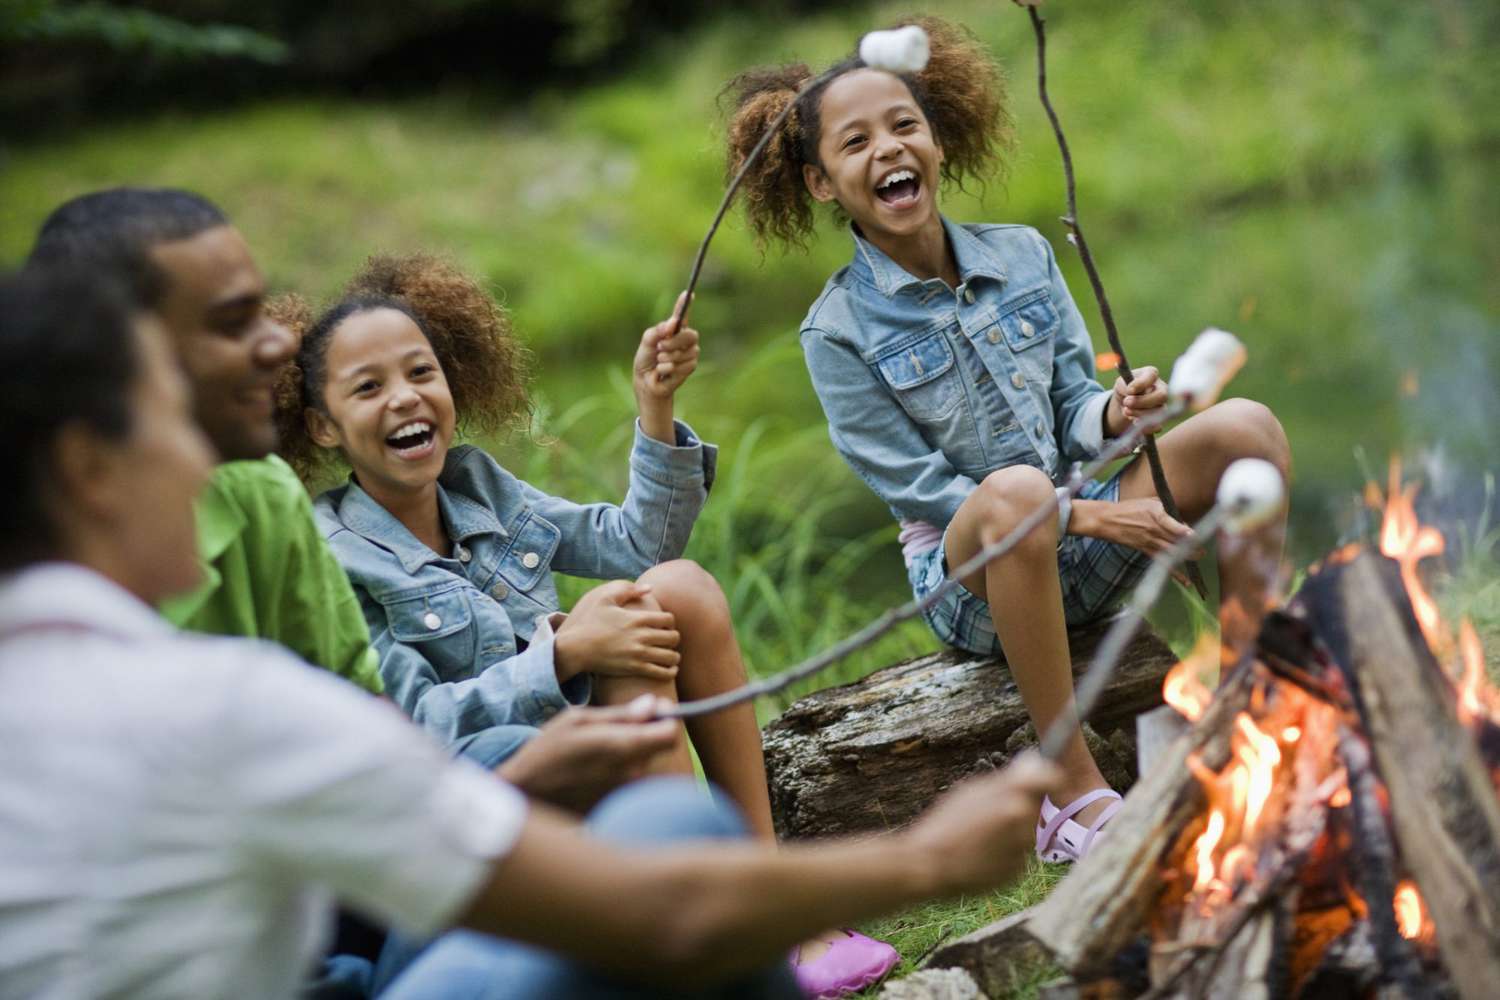 Camping with Kids: Fun Activities to Keep Them Entertained and Happy